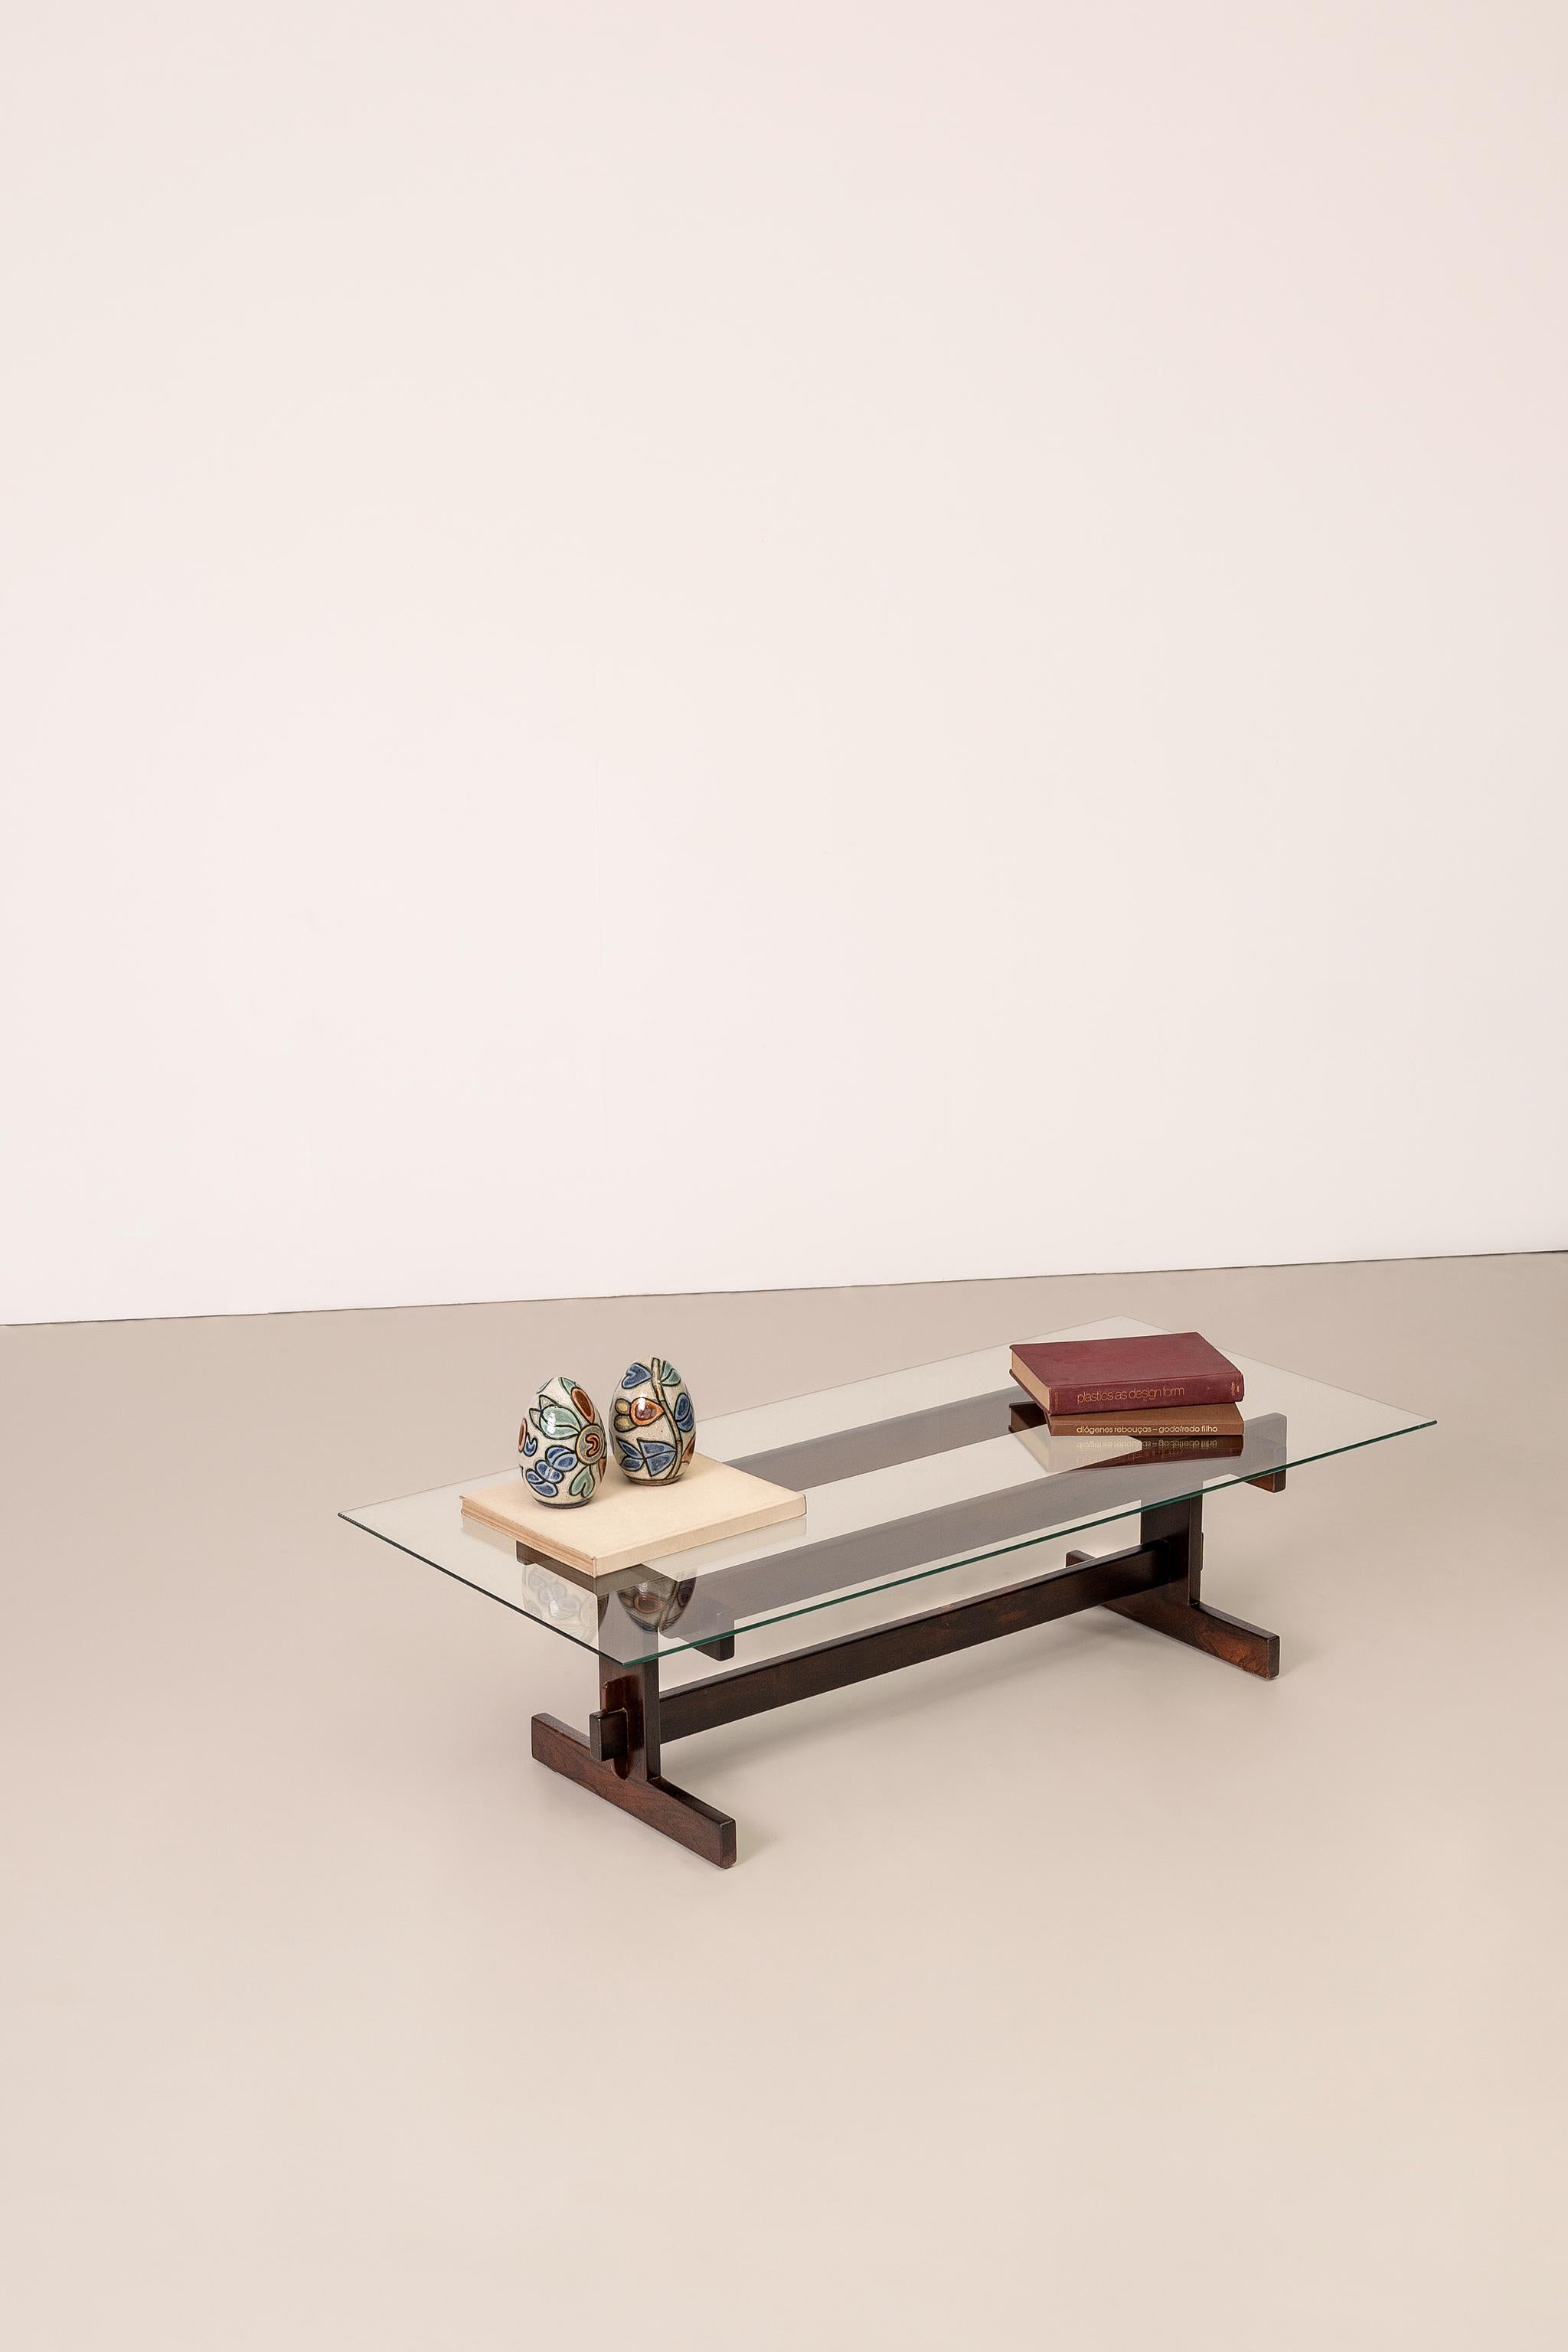 Woodwork Brazilian Midcentury Center Table in Rosewood and Glass, c. 1970